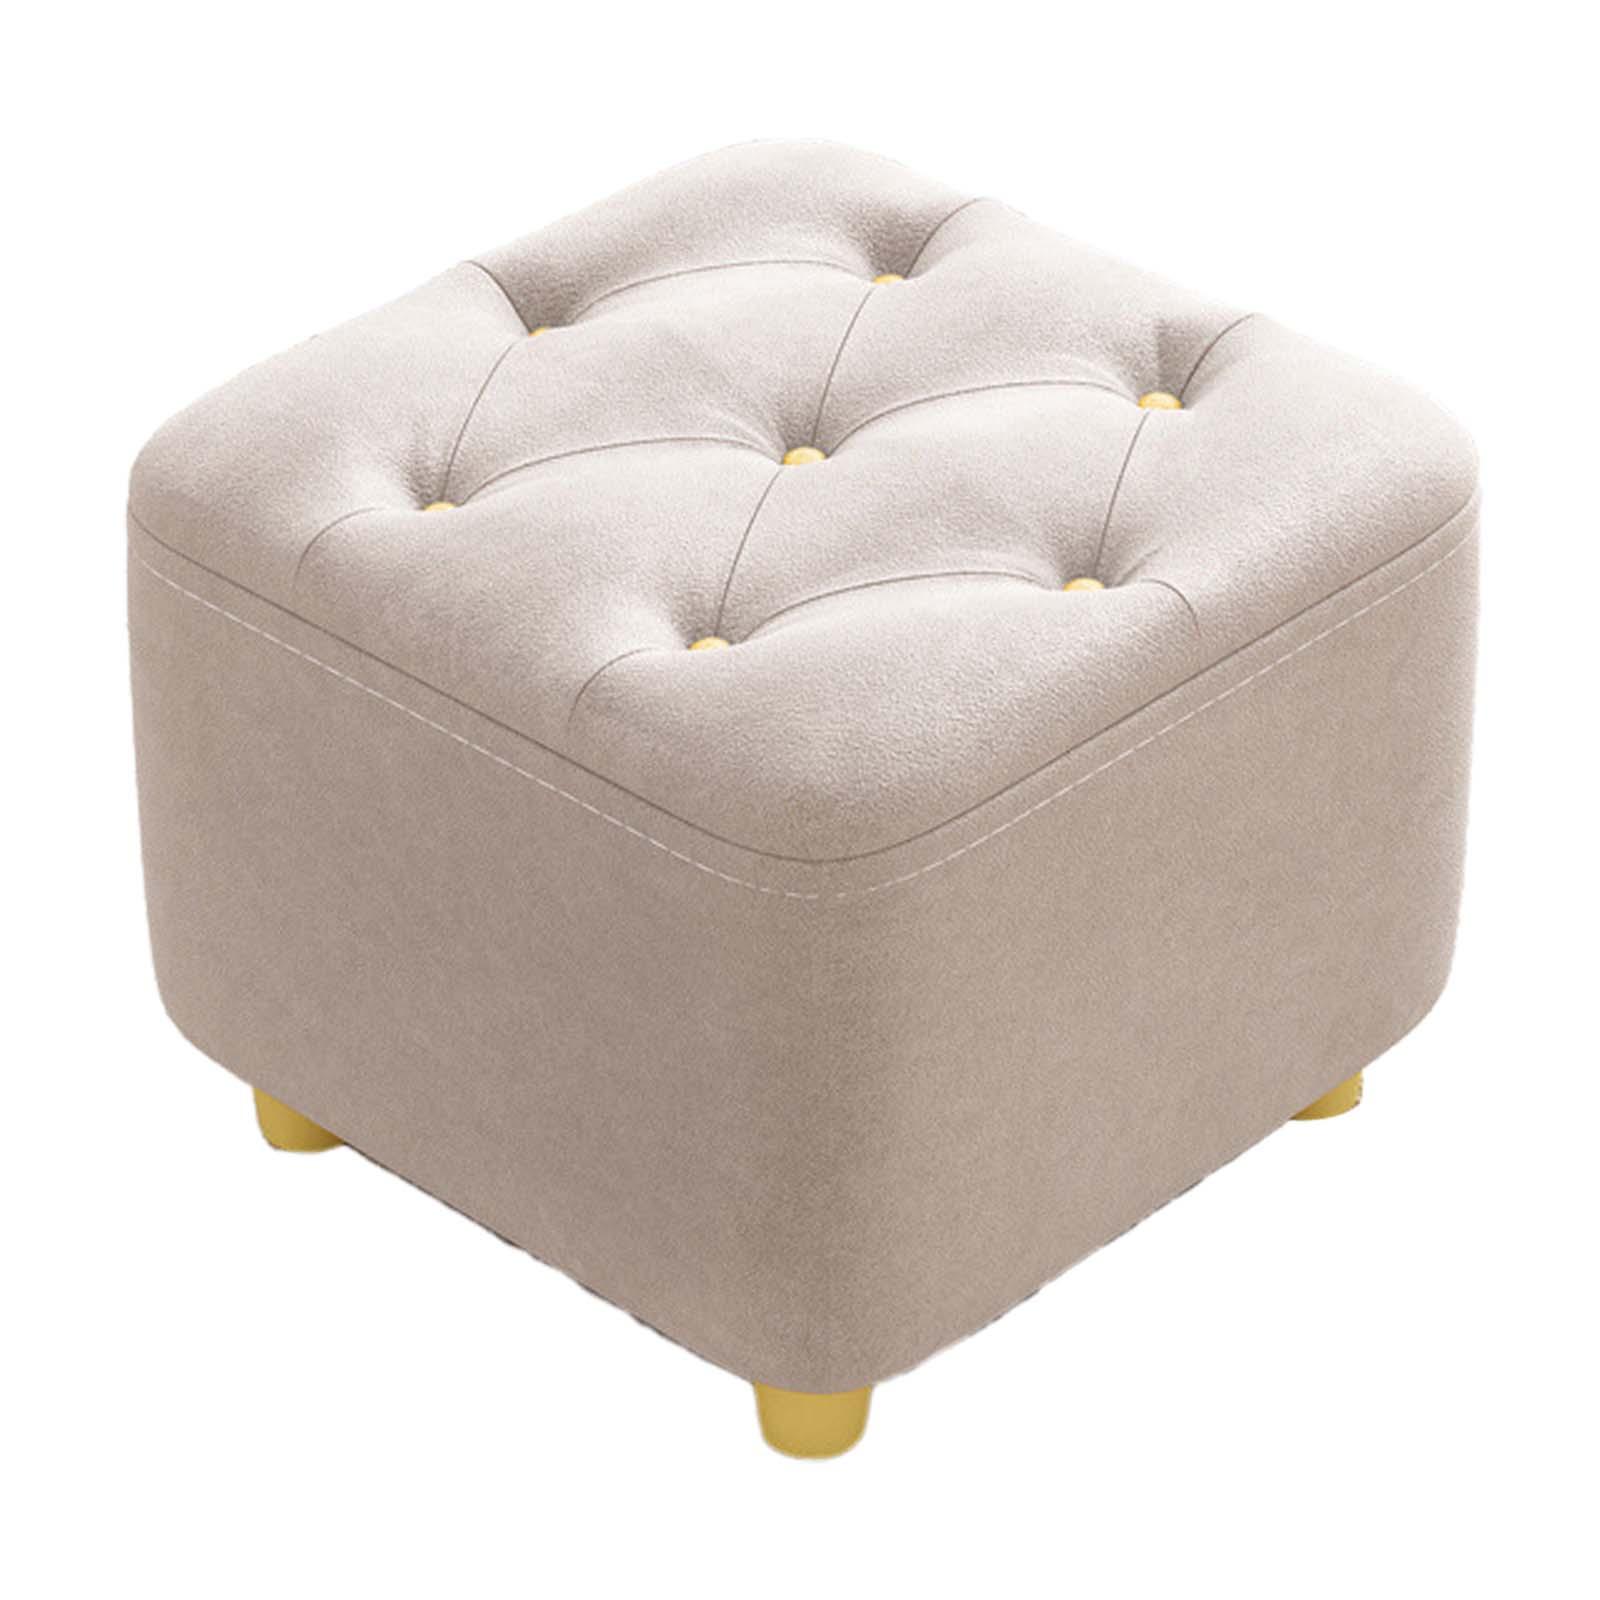 Square Footstool Foot Stool Comfortable Stepstool Creative Ottoman Stool Footrest for Living Room Dressing Room Bedroom Couch beige - image 4 of 8